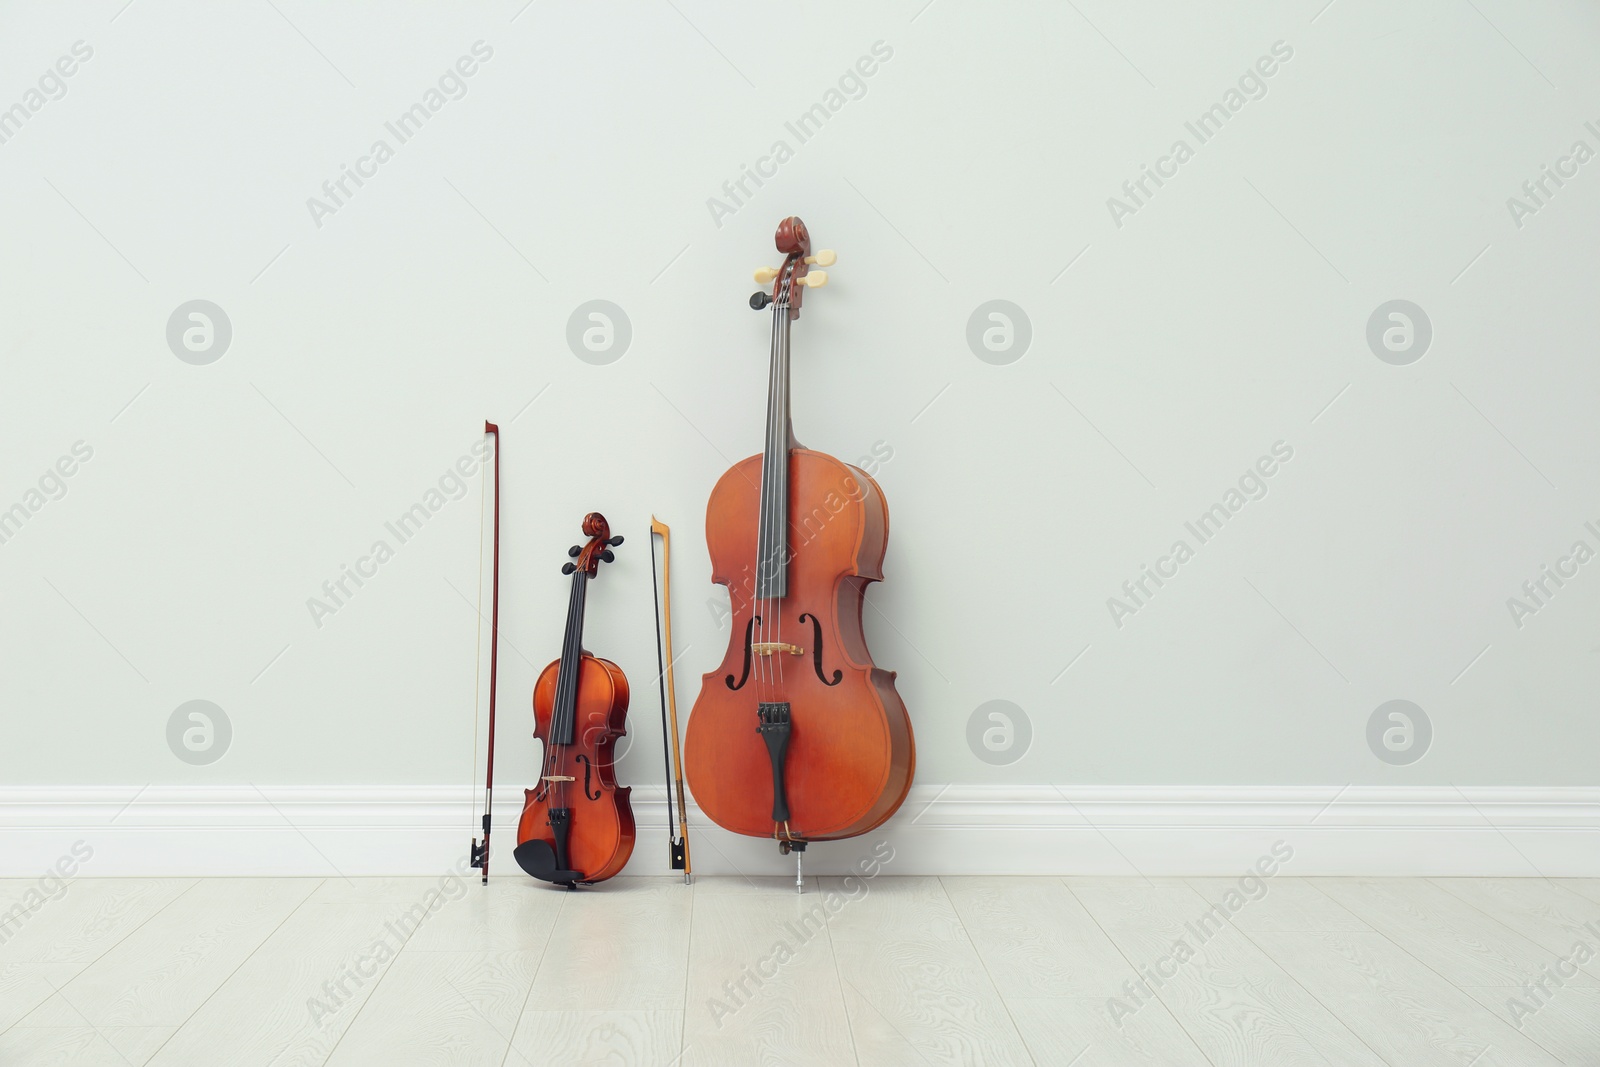 Photo of Stringed musical instruments near white wall indoors